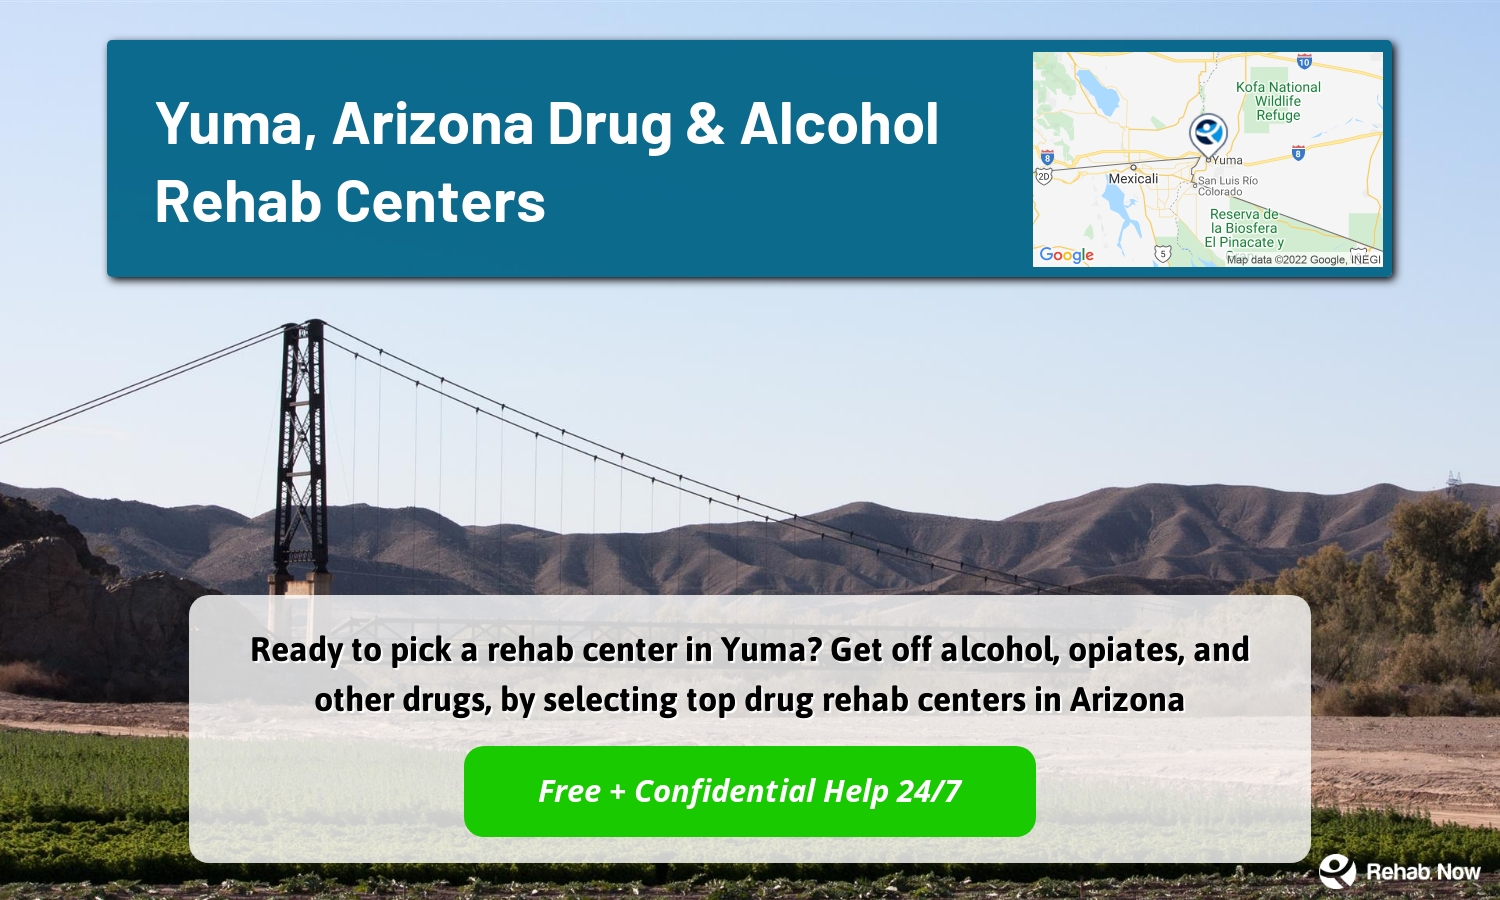 Ready to pick a rehab center in Yuma? Get off alcohol, opiates, and other drugs, by selecting top drug rehab centers in Arizona